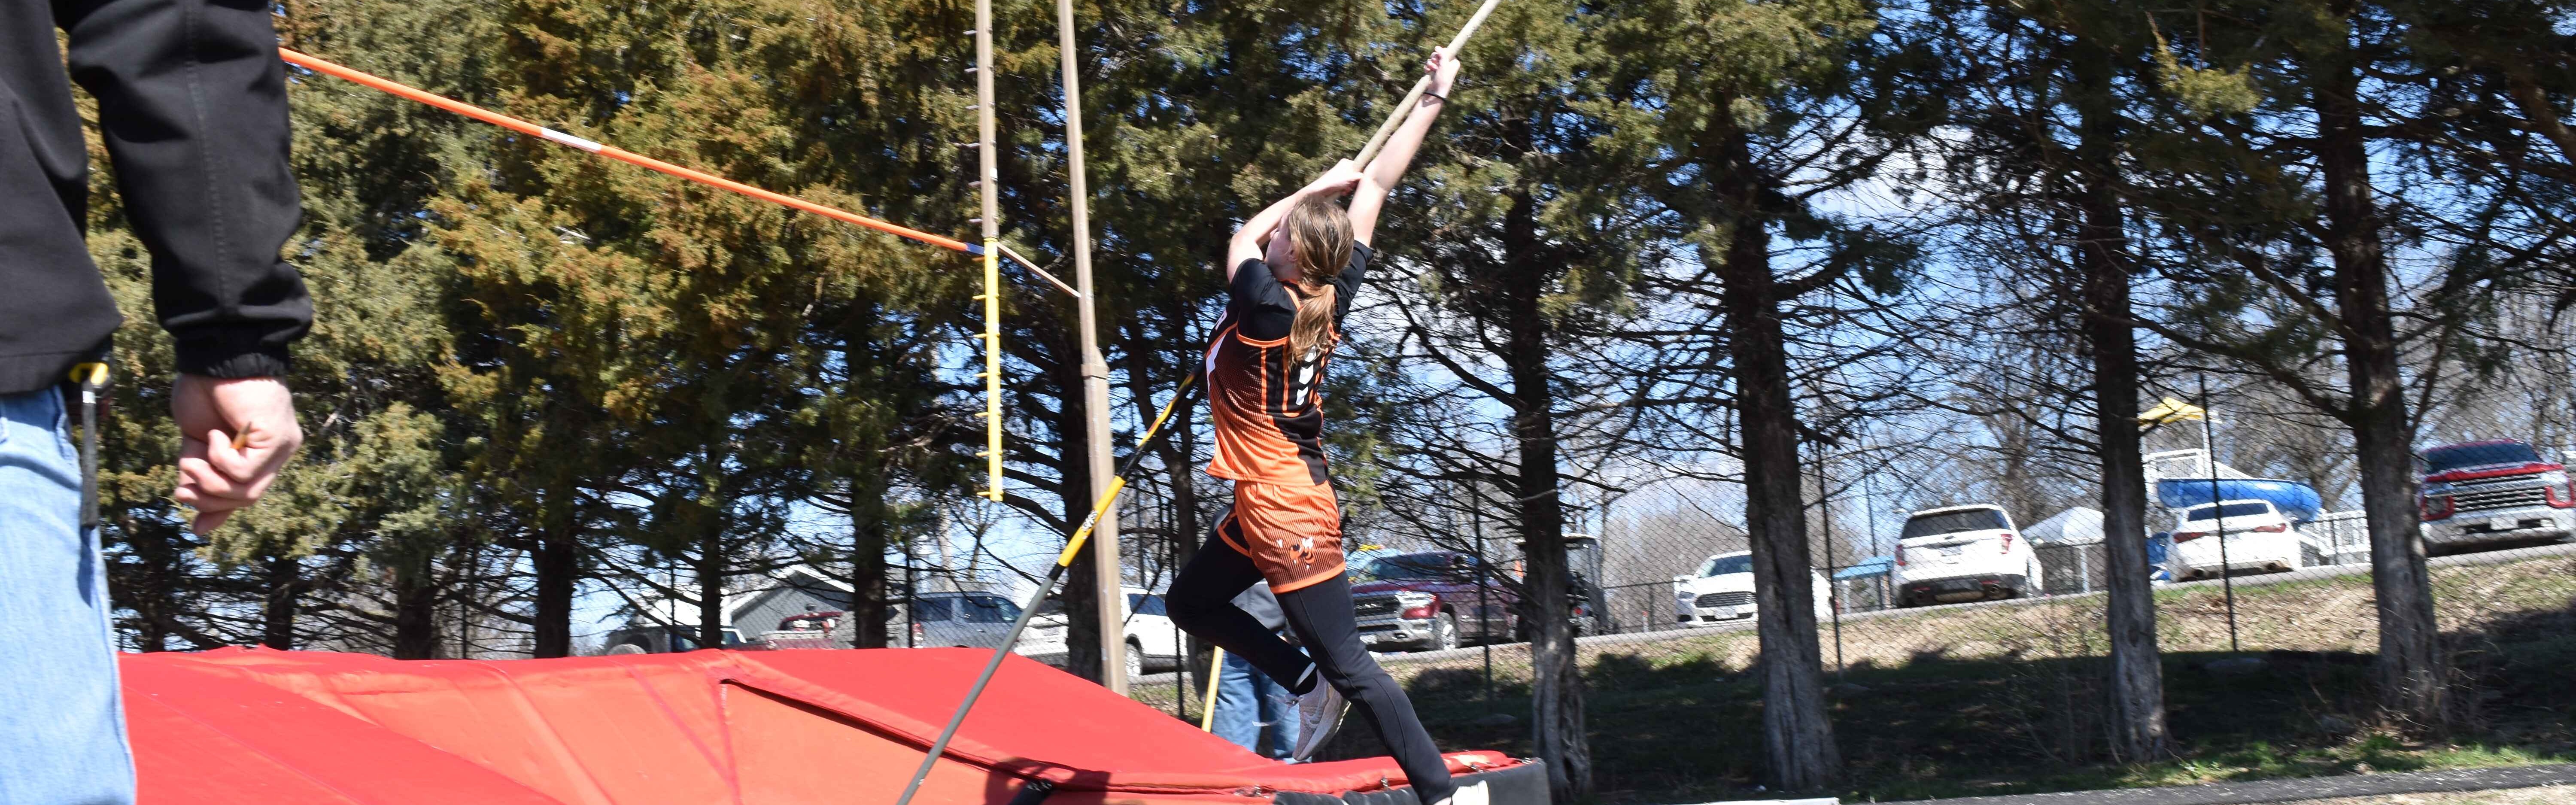 Tracy Wiles Pole Vaulting